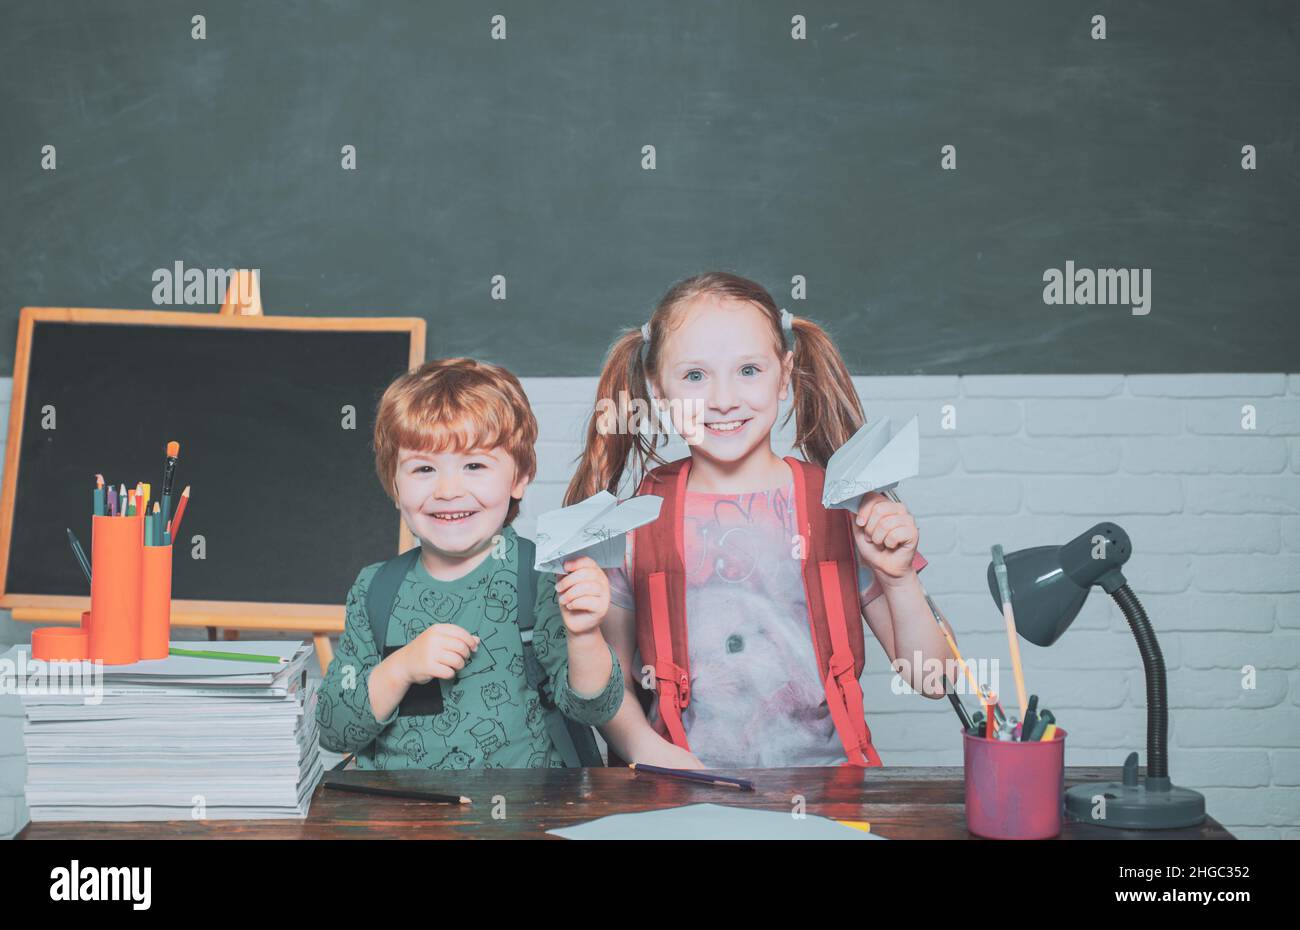 Back to school and happy time. Funny little child having fun on blackboard background. Friendly child in classroom play with paper airplane near Stock Photo